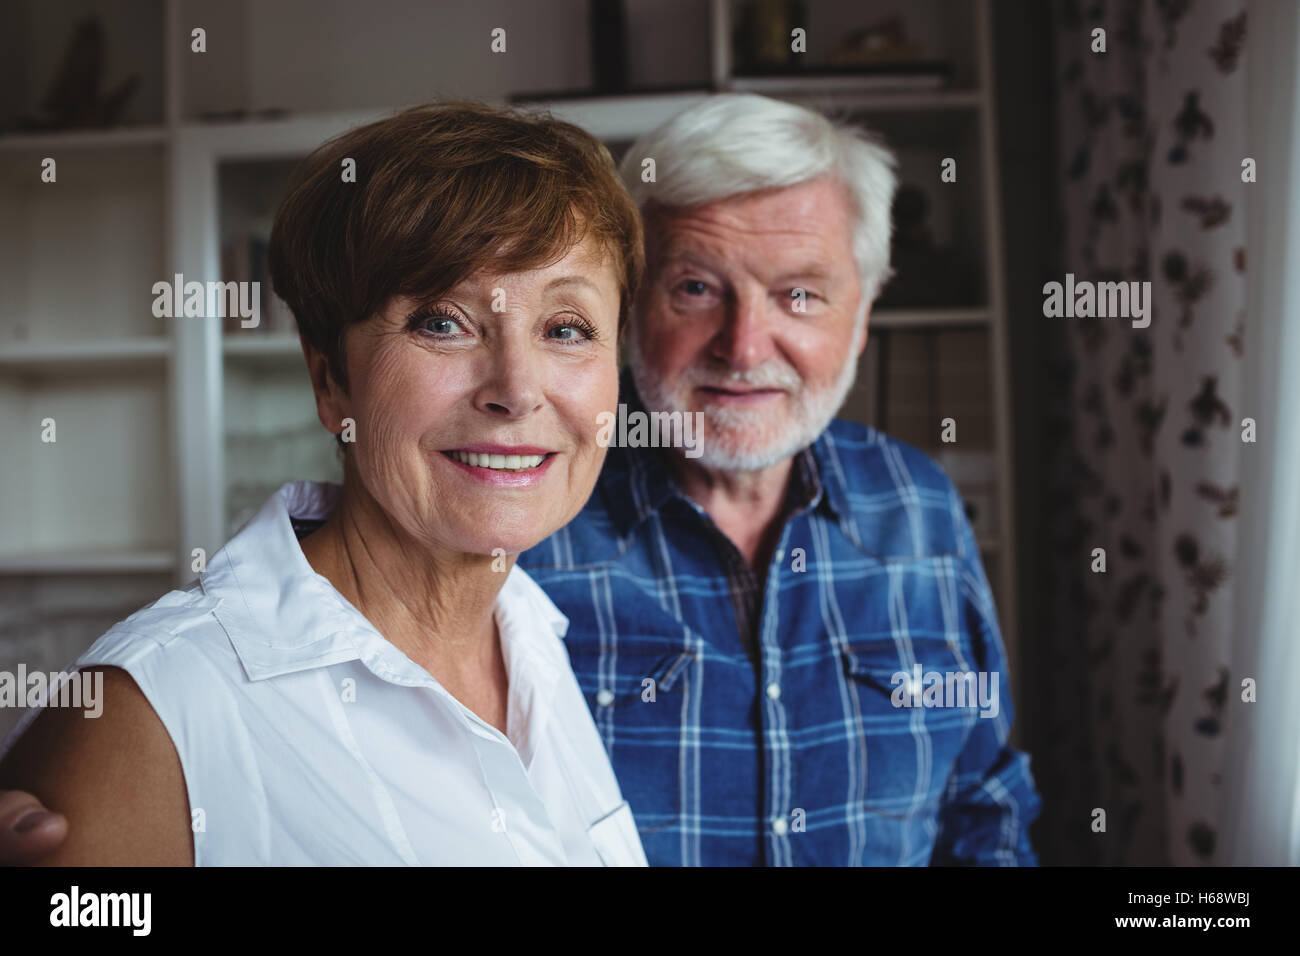 Senior couple smiling in living room Banque D'Images